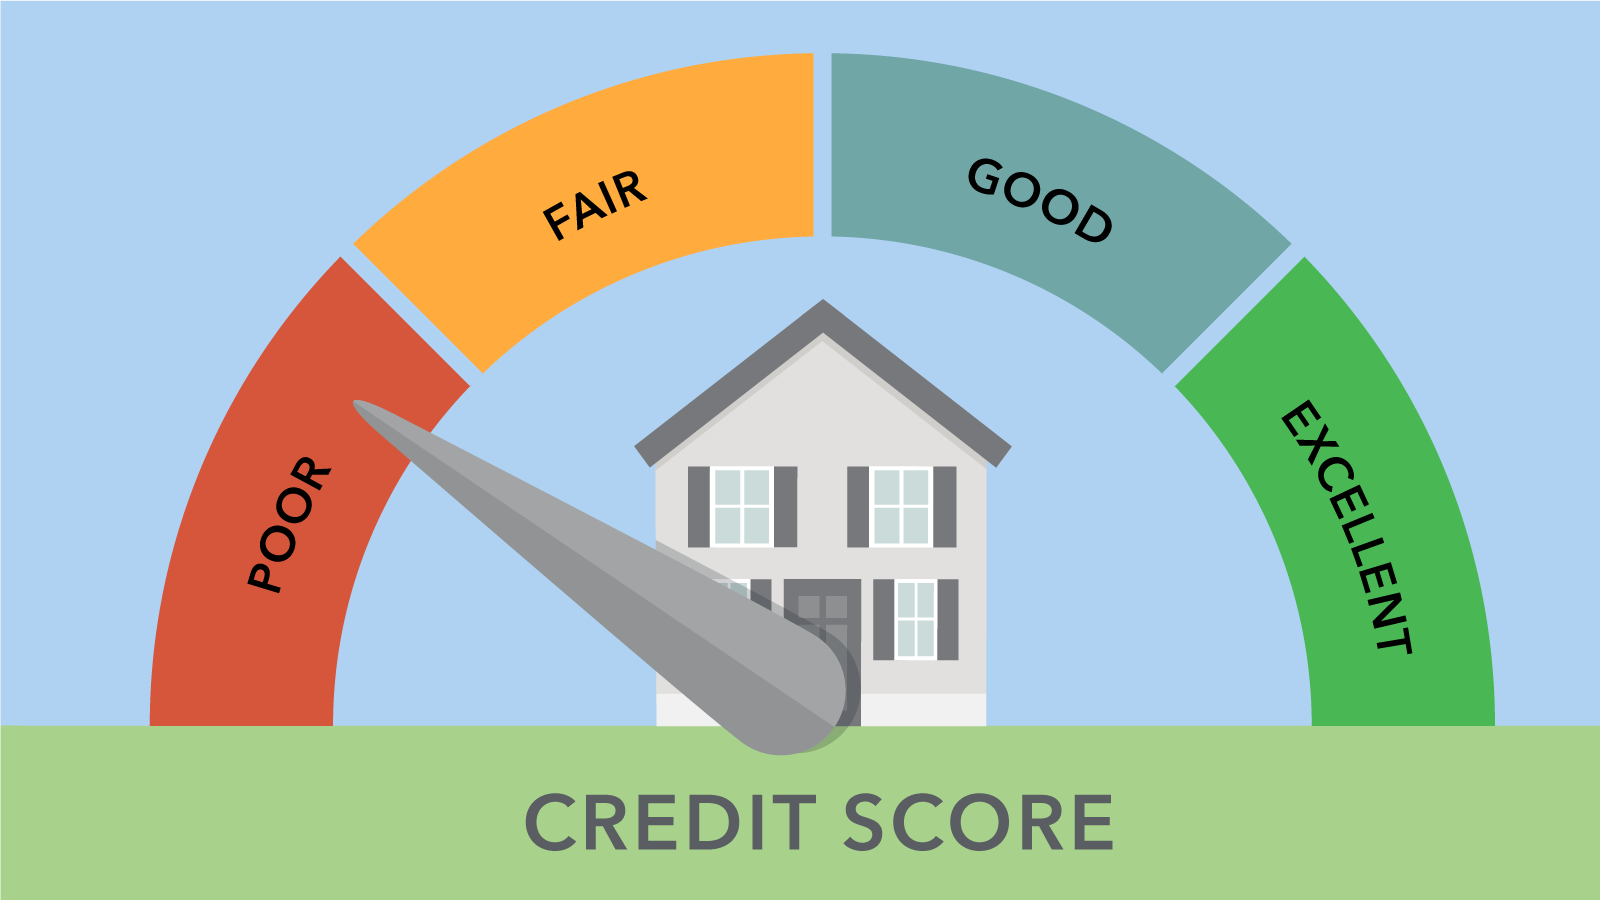 CREDIT SCORE IS IN NEEDED WHEN YOU ARE BUYING HOUSE